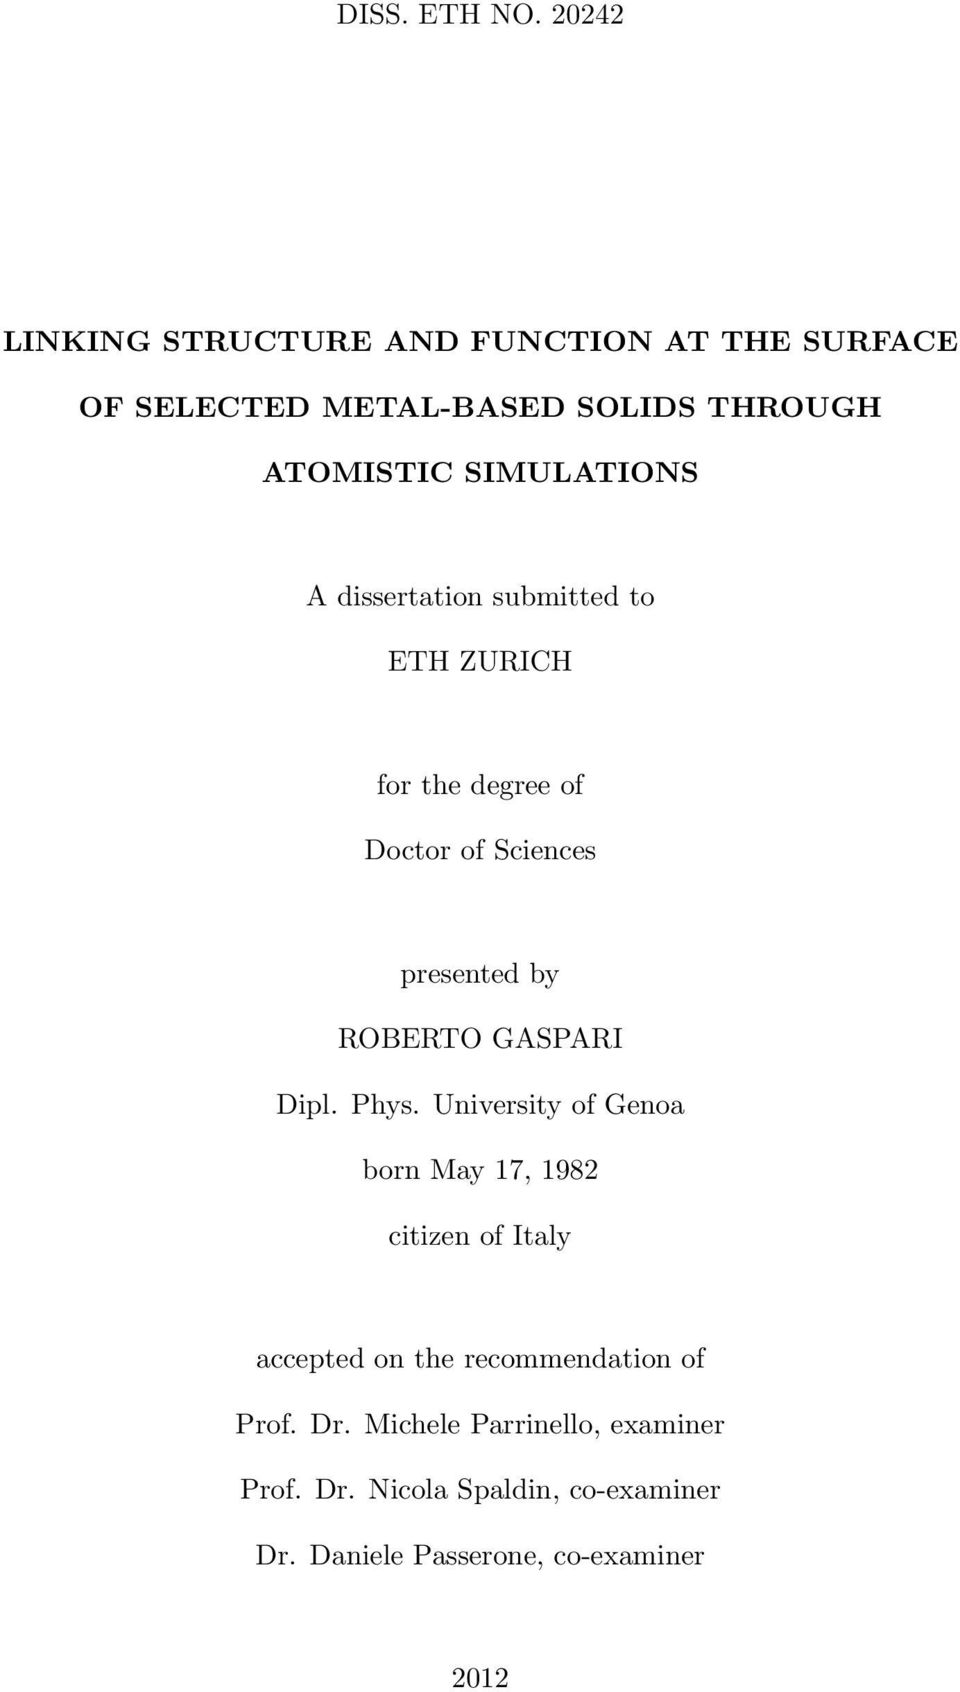 A dissertation submitted to ETH ZURICH for the degree of Doctor of Sciences presented by ROBERTO GASPARI Dipl.